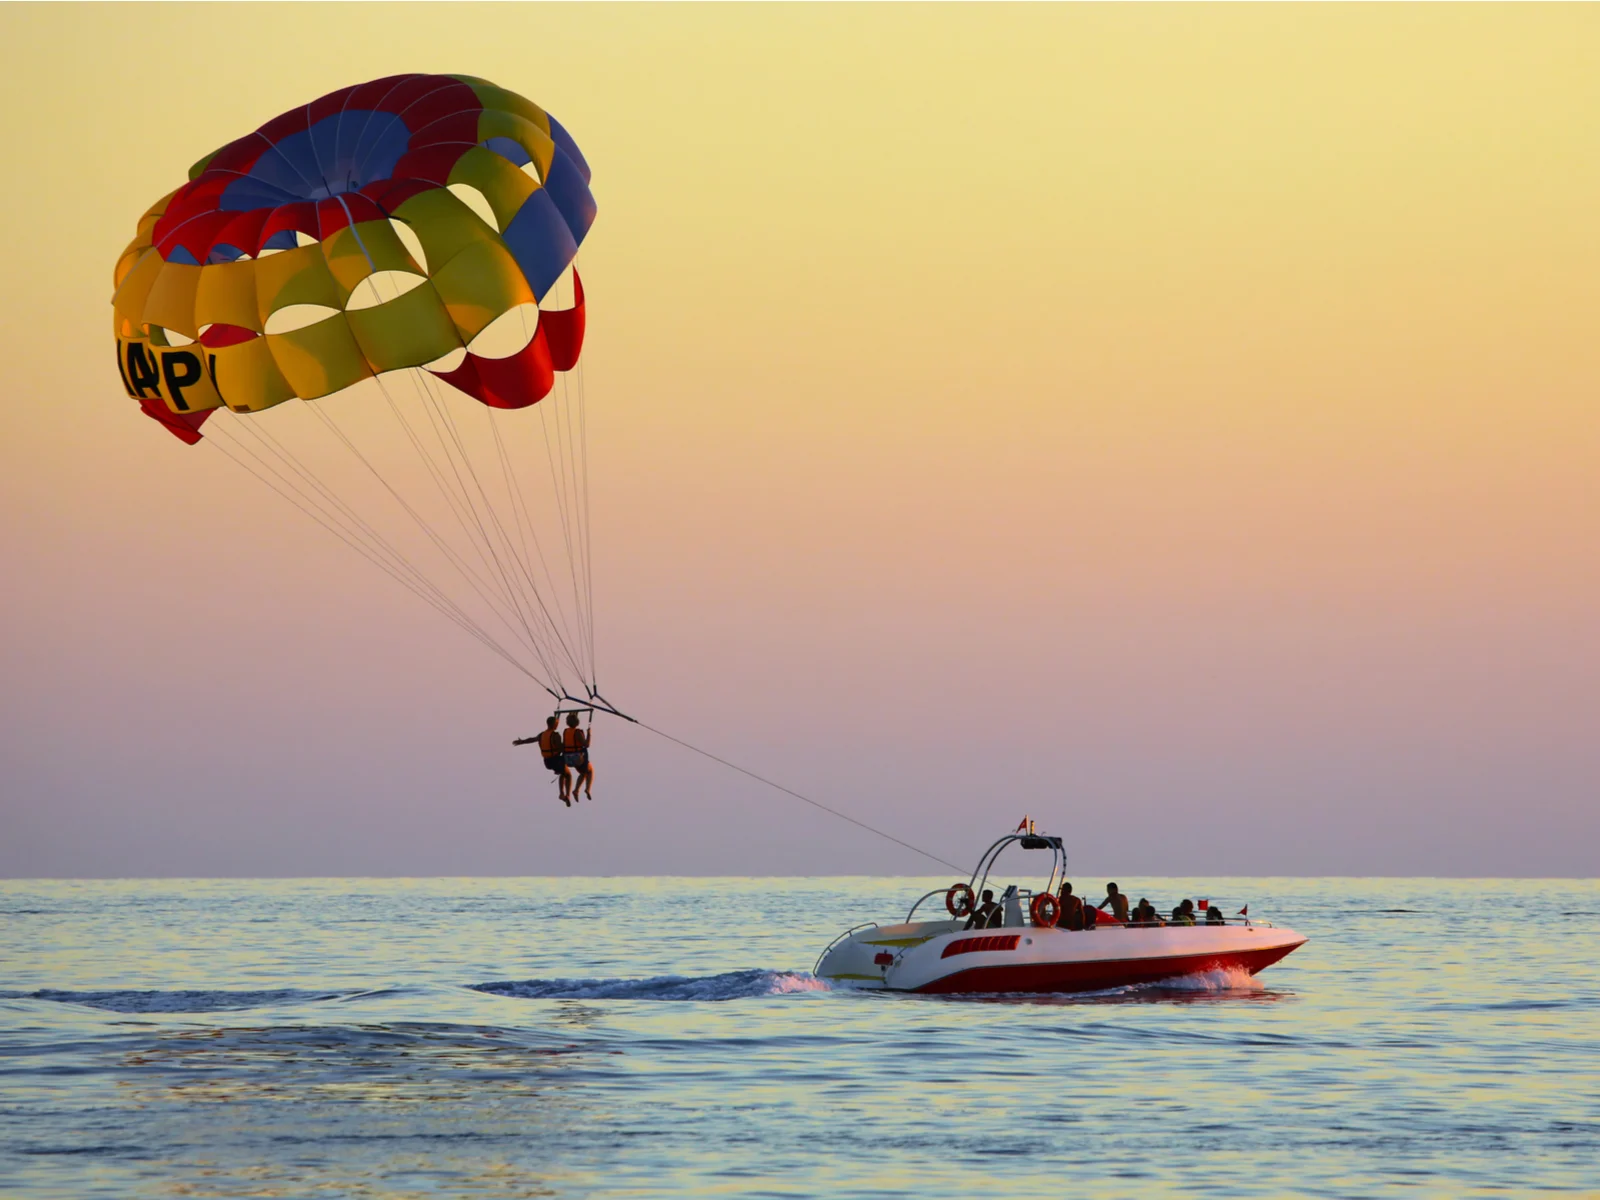 People going parasailing at dusk, one of the best things to do in Myrtle Beach